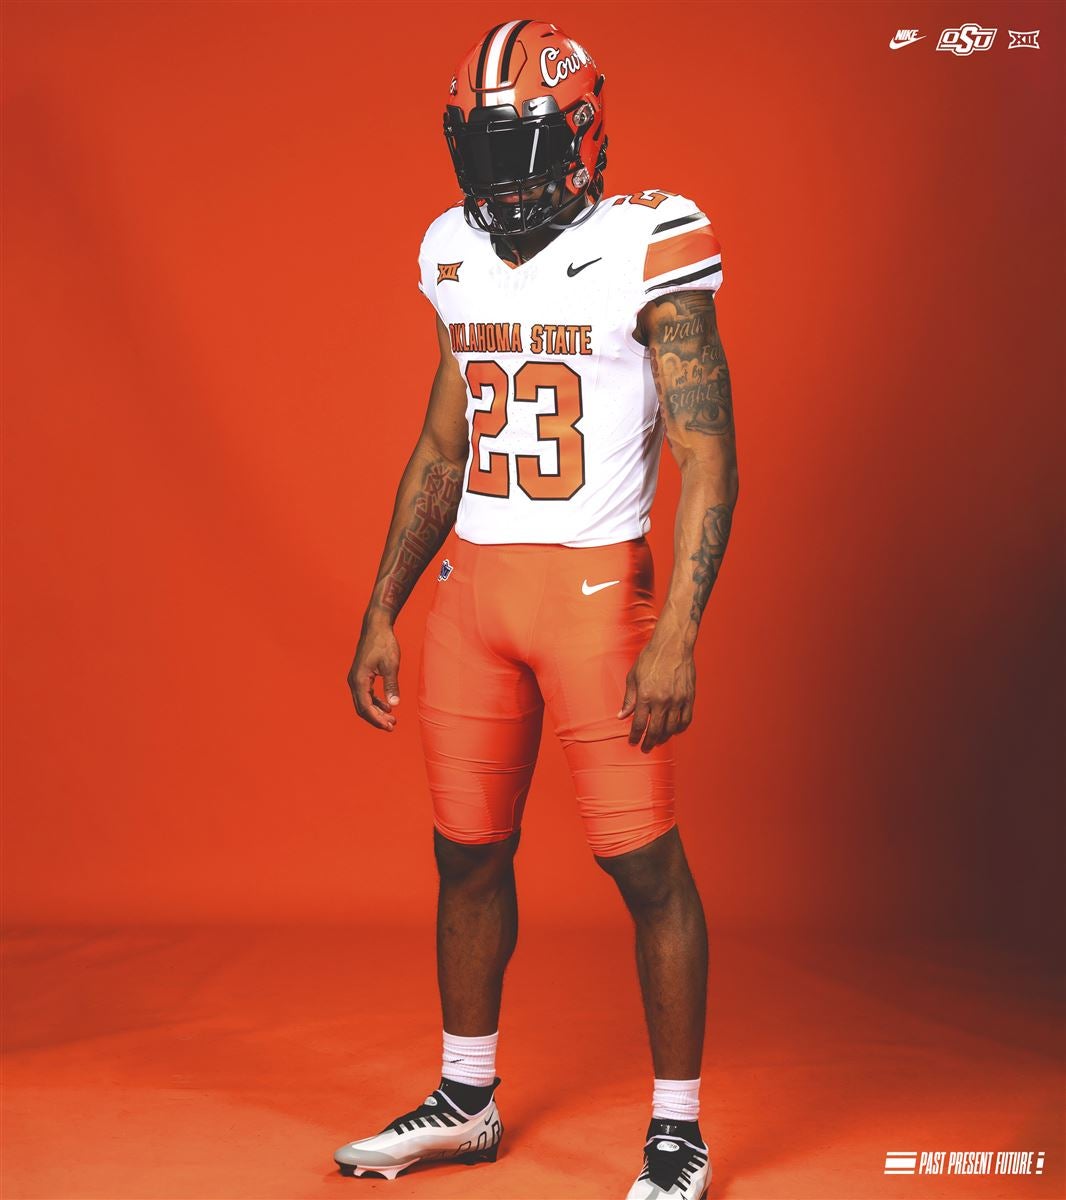 GALLERY New Oklahoma State football uniforms released